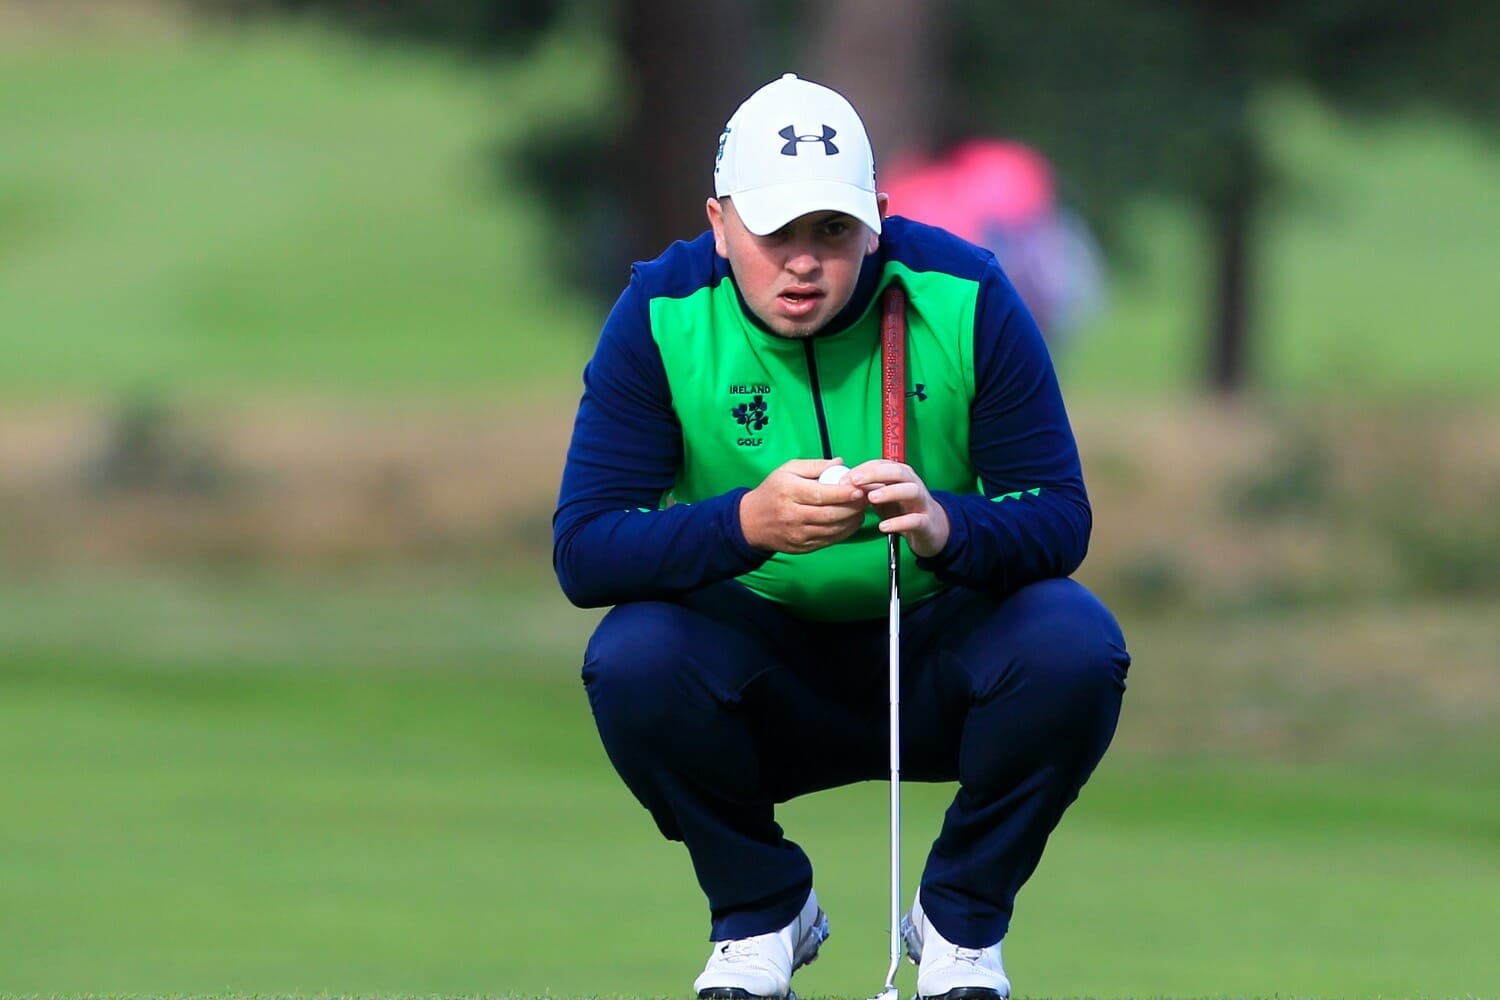 Team Ireland right in the hunt at African Amateur